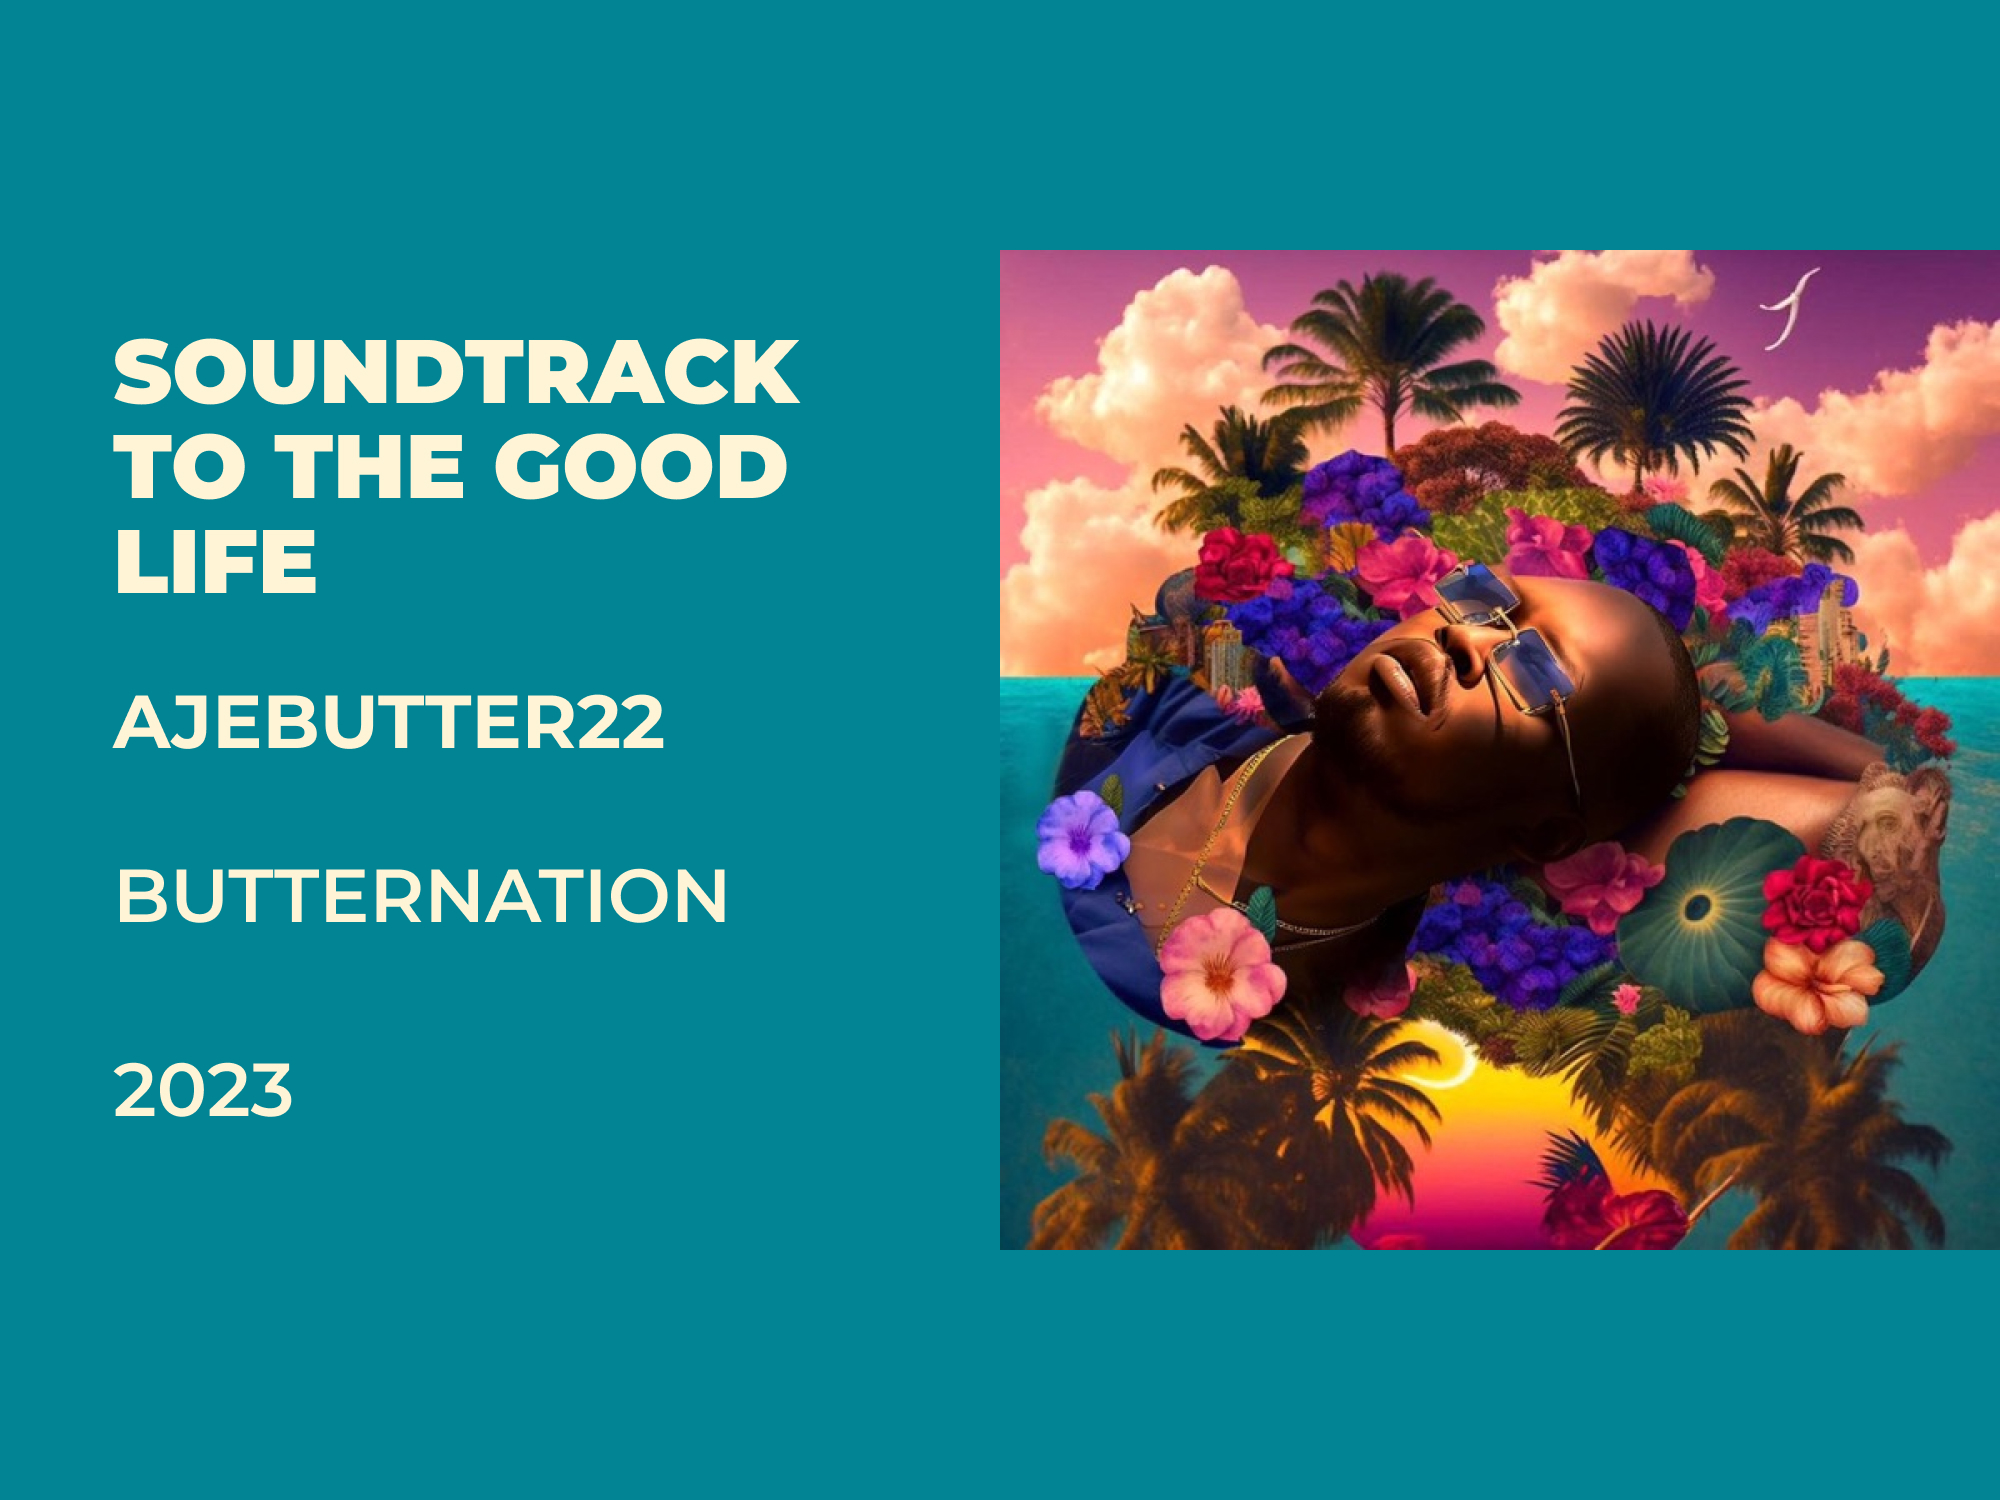 Review: Ajebutter22’s ‘Soundtrack To The Good Life’